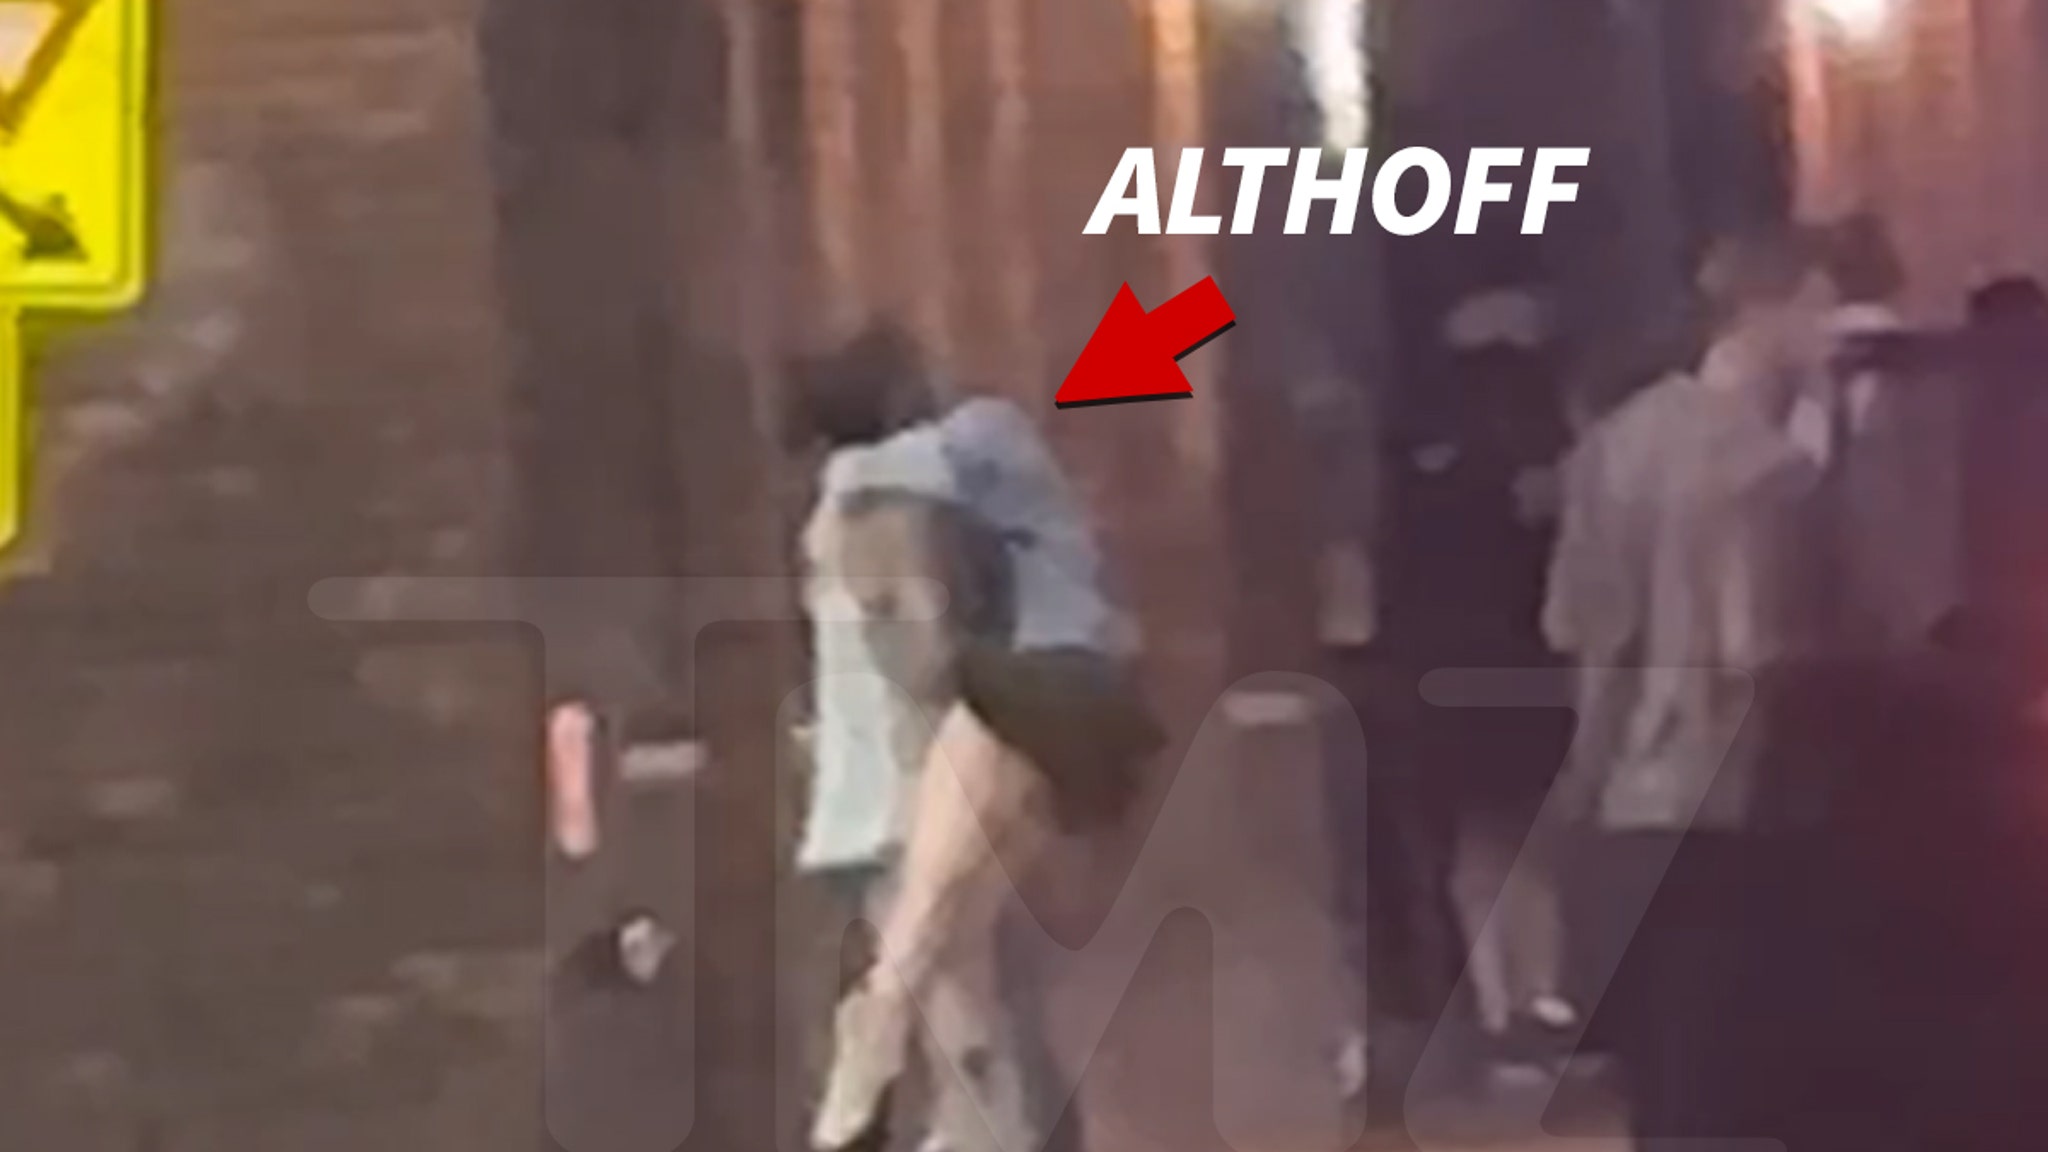 Bobby Altuve was dragged out of a Nashville bar, video shows